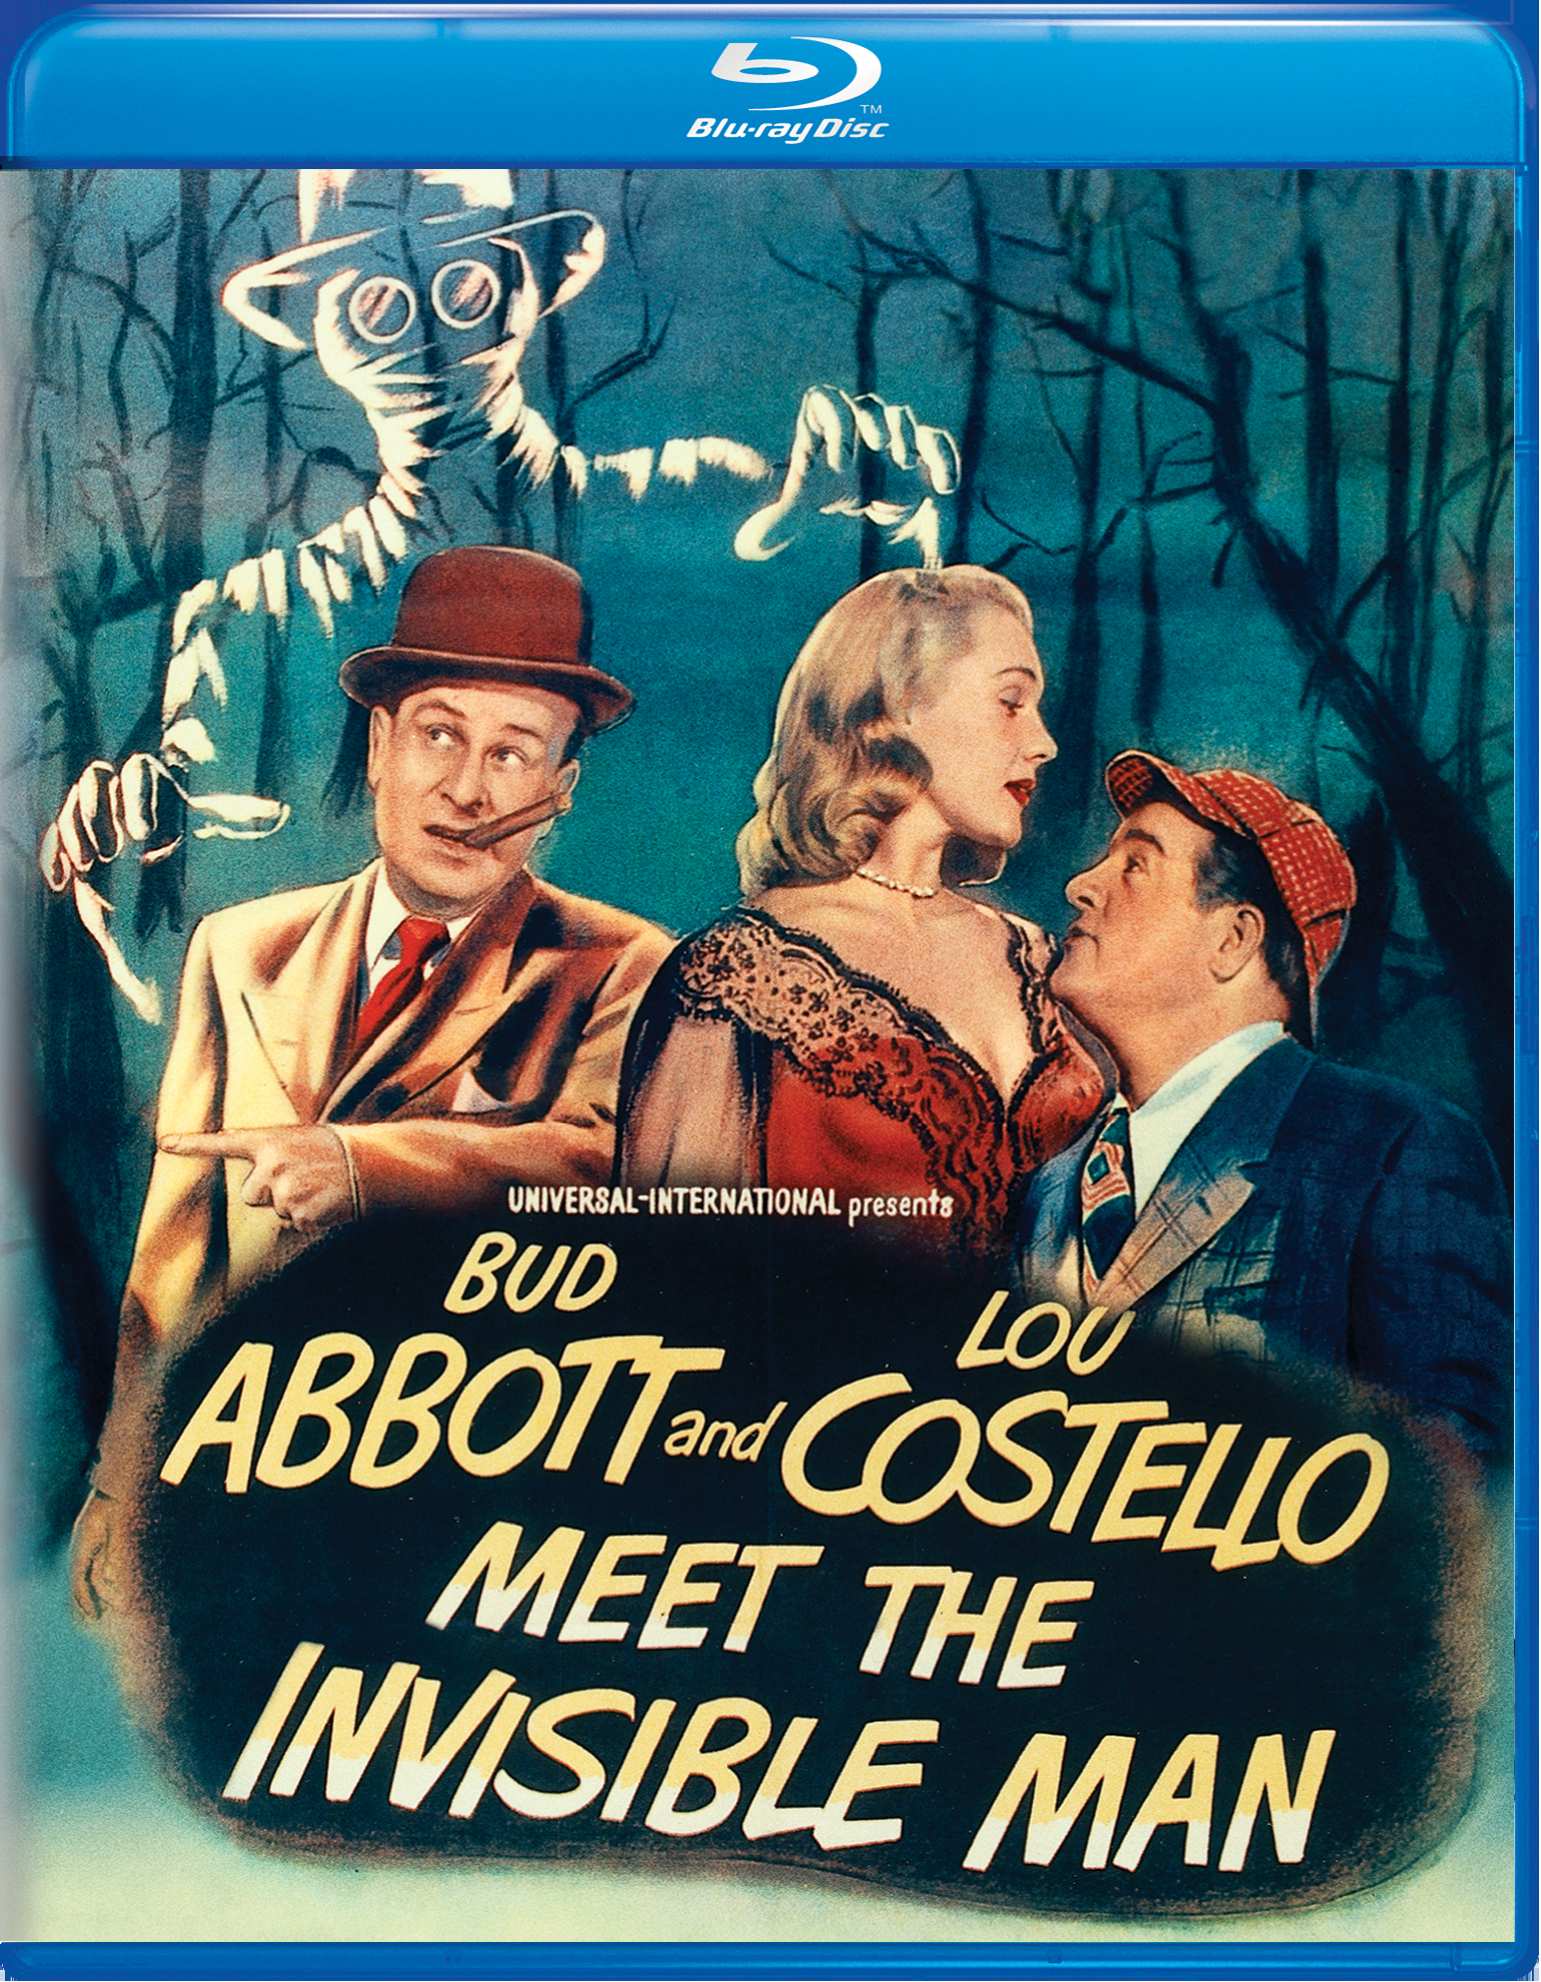 Abbott And Costello Meet The Invisible Man - Blu-ray [ 1951 ]  - Classic Movies On Blu-ray - Movies On GRUV